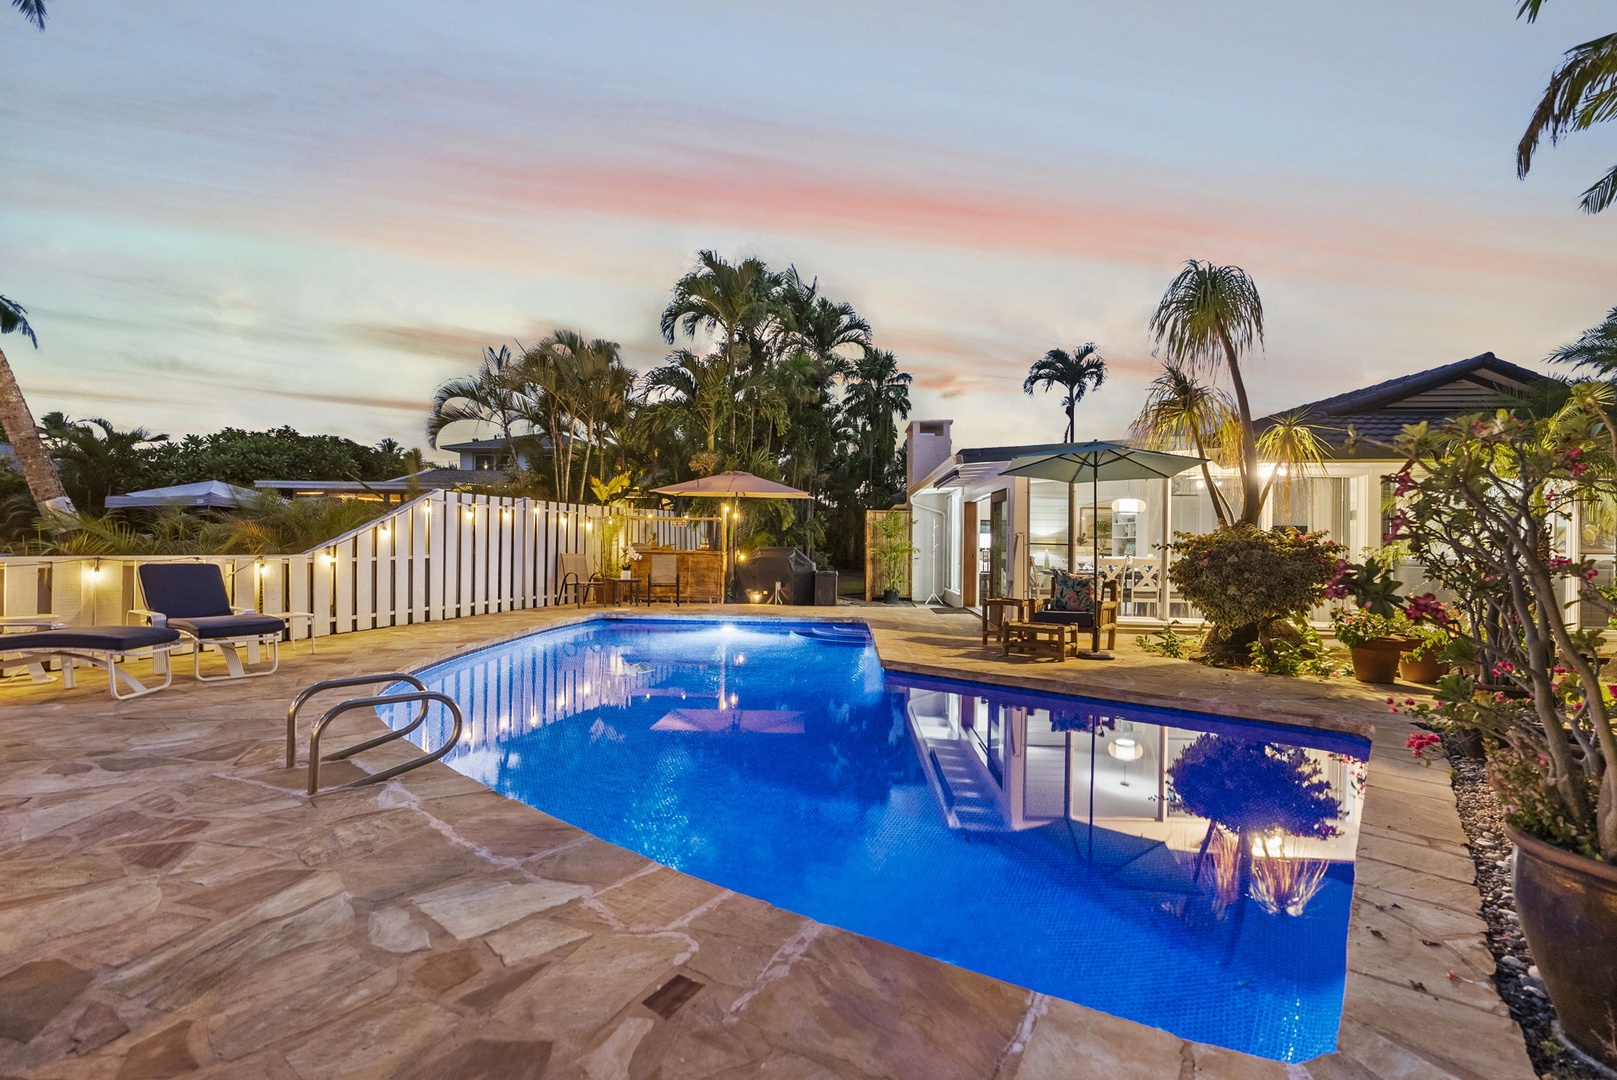 Kailua Vacation Rentals, Hale Aloha - Enchanting evenings await by the shimmering pool under the twilight sky